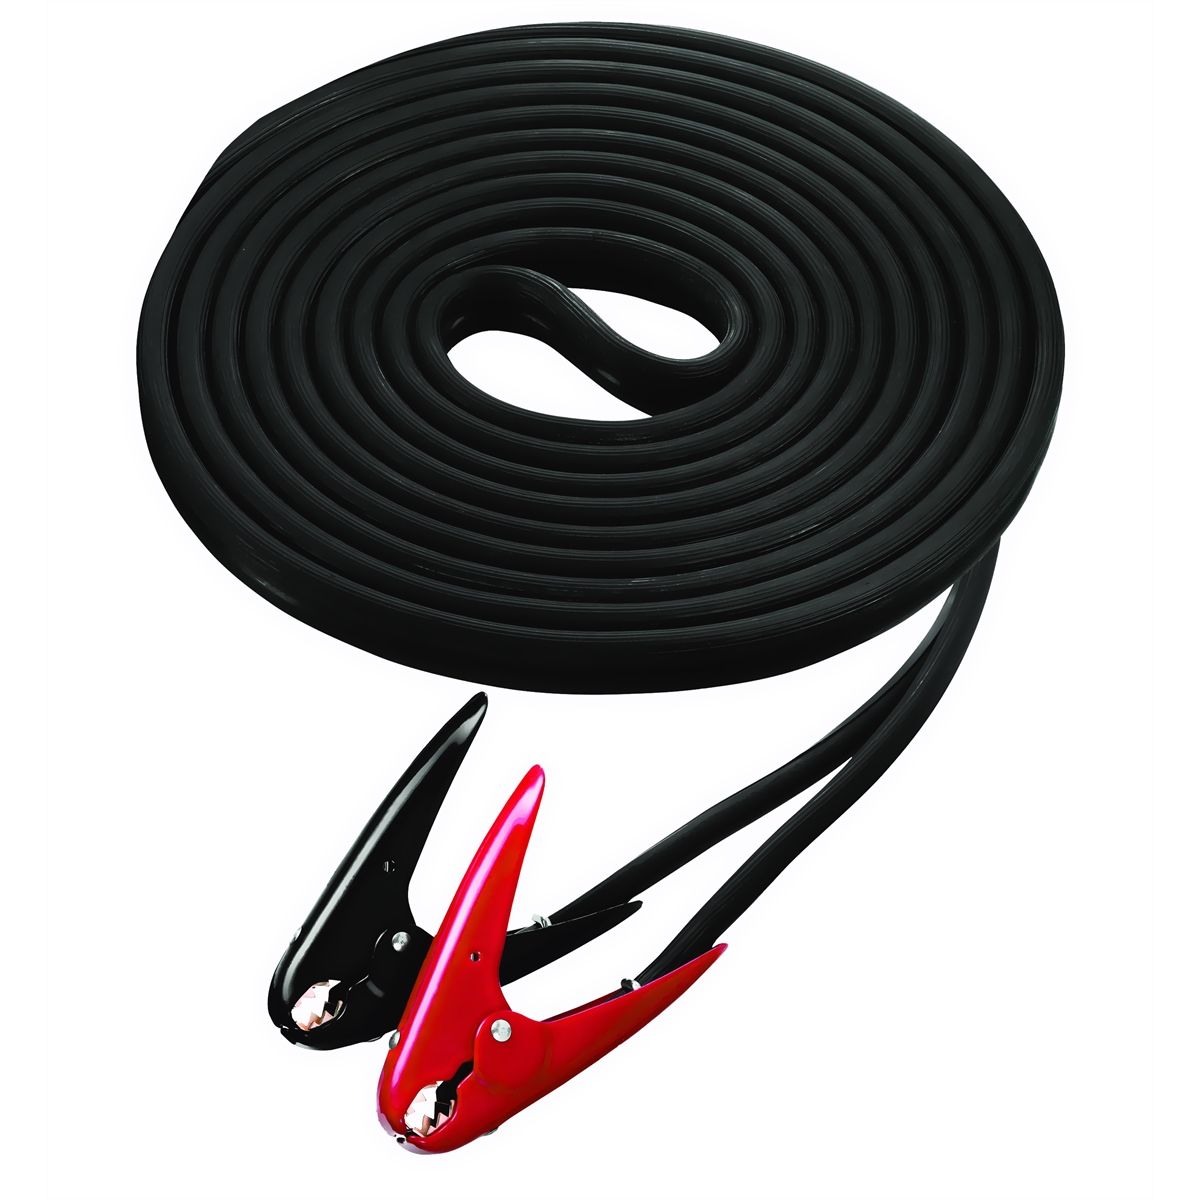 25' Extra Heavy Duty 2 Gauge Cables with 500 Amp Parrot Jaw Clam